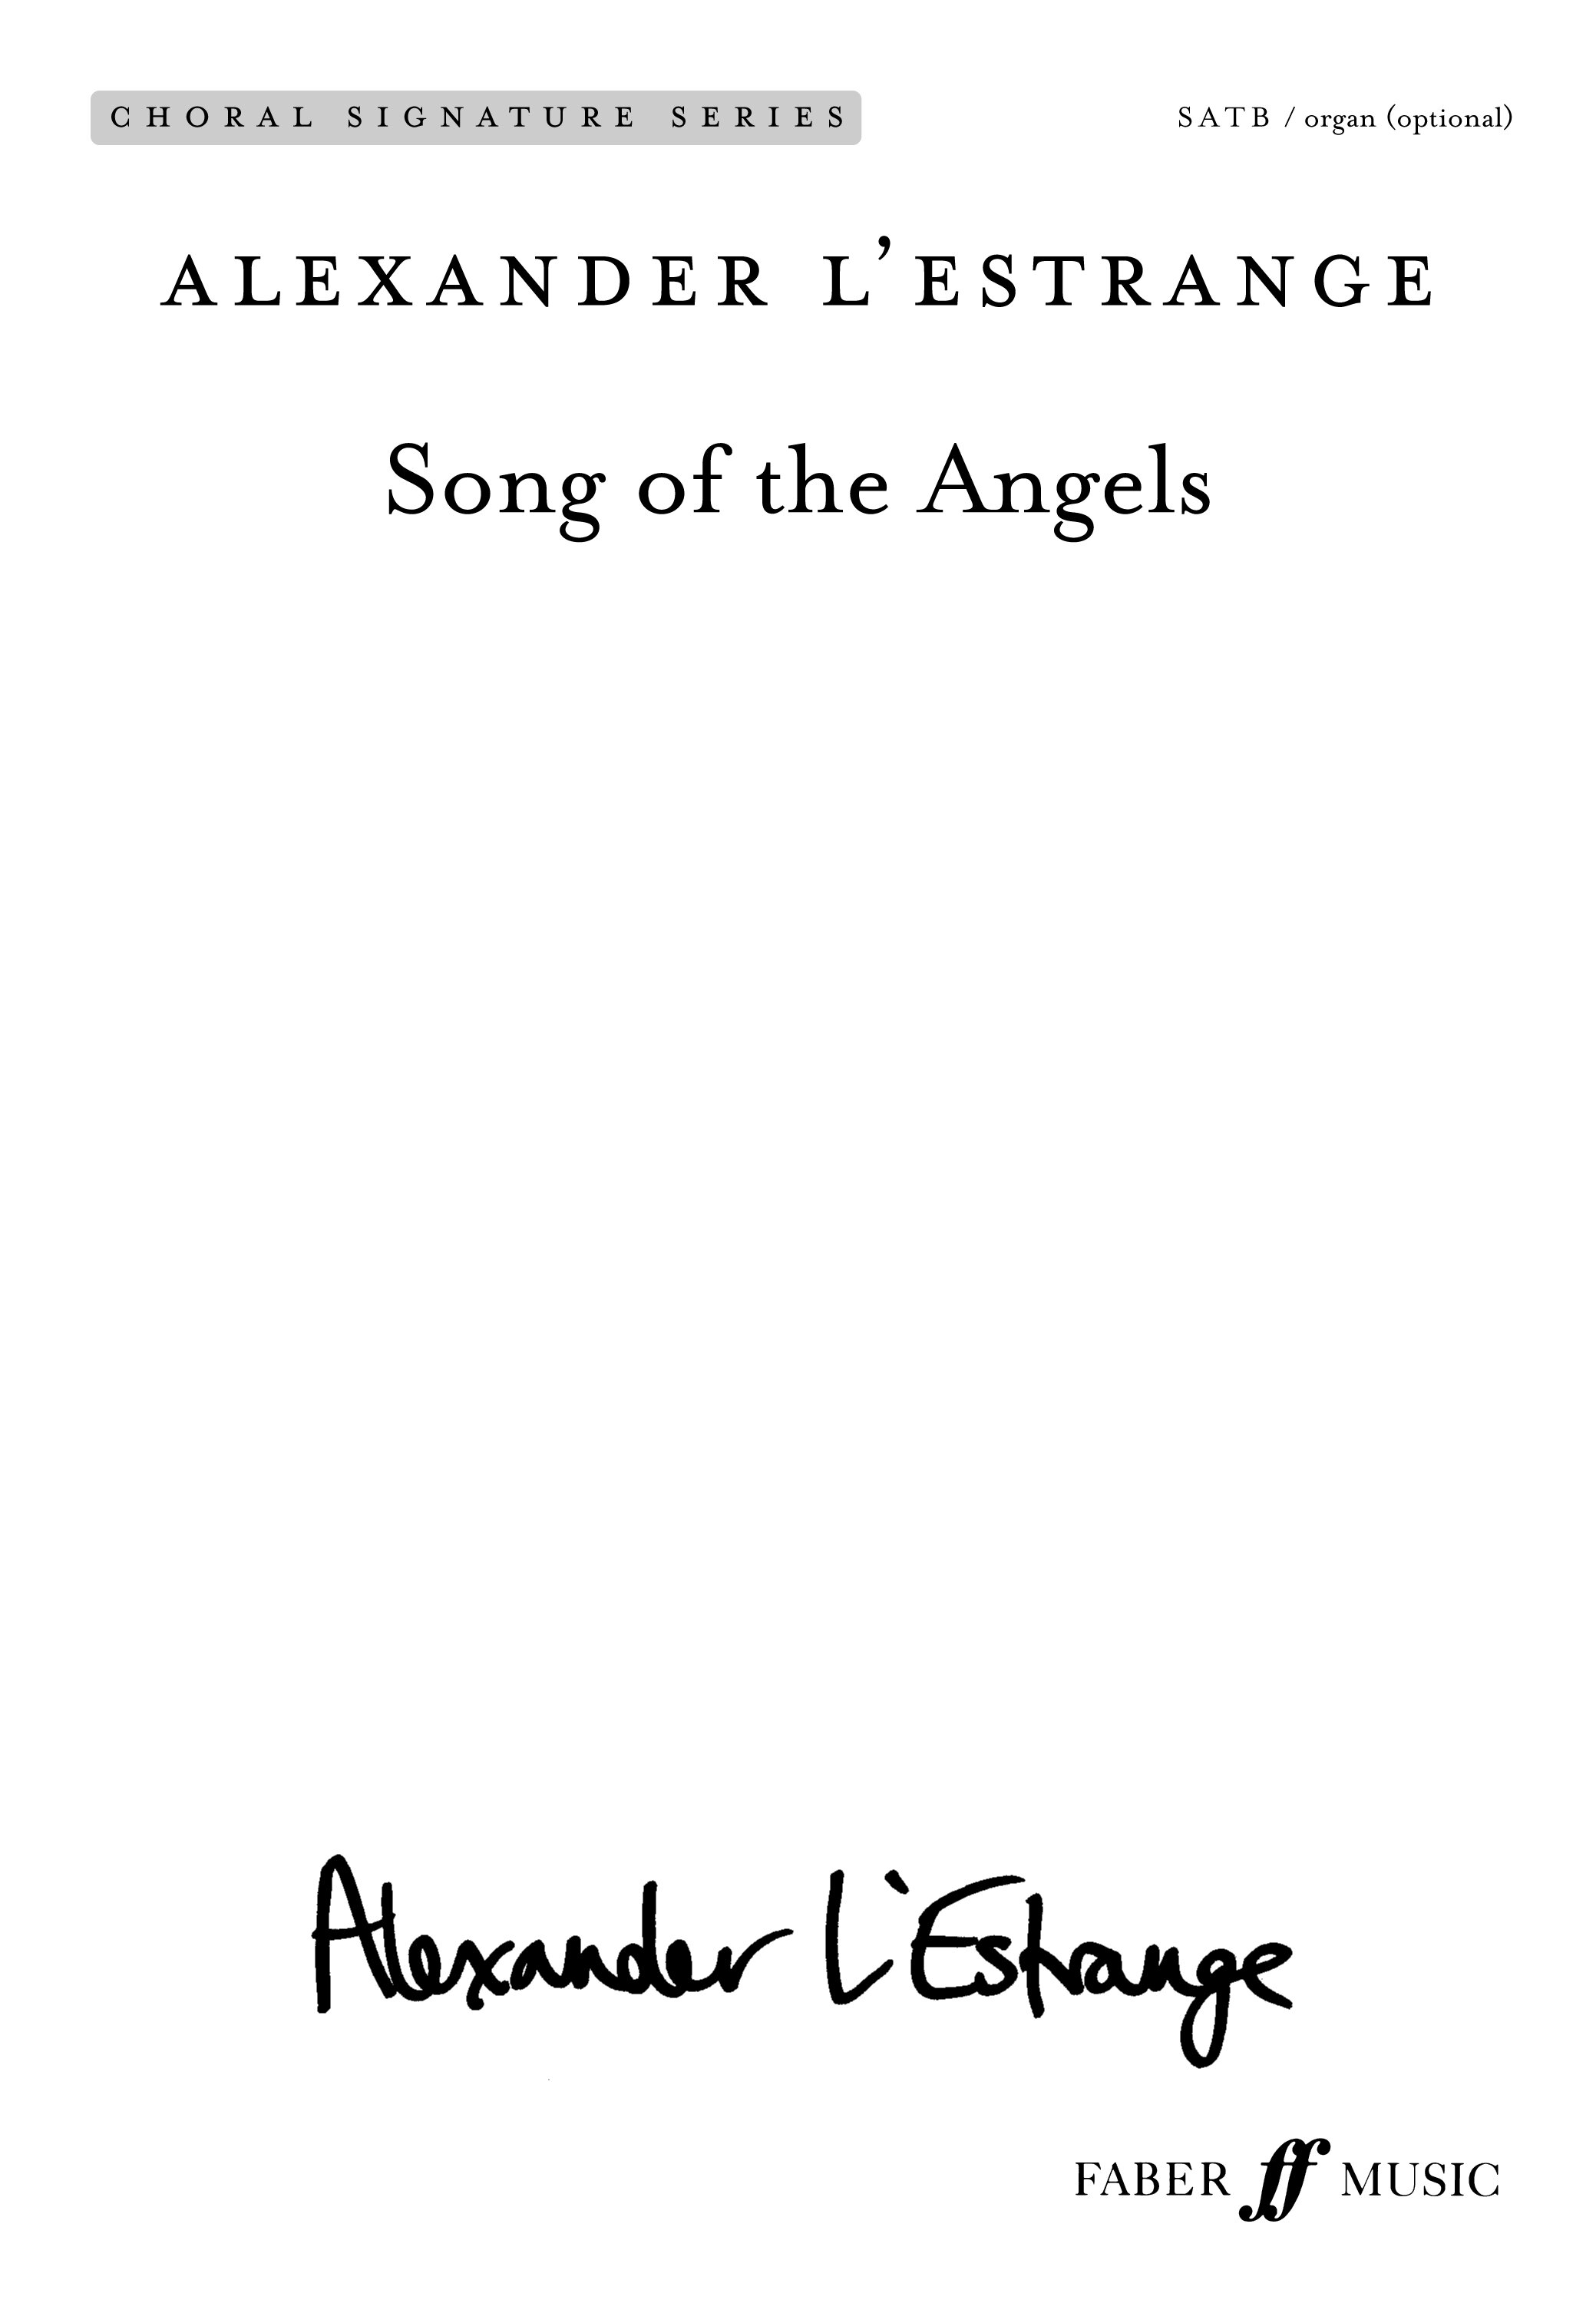 Song of the angels.jpg